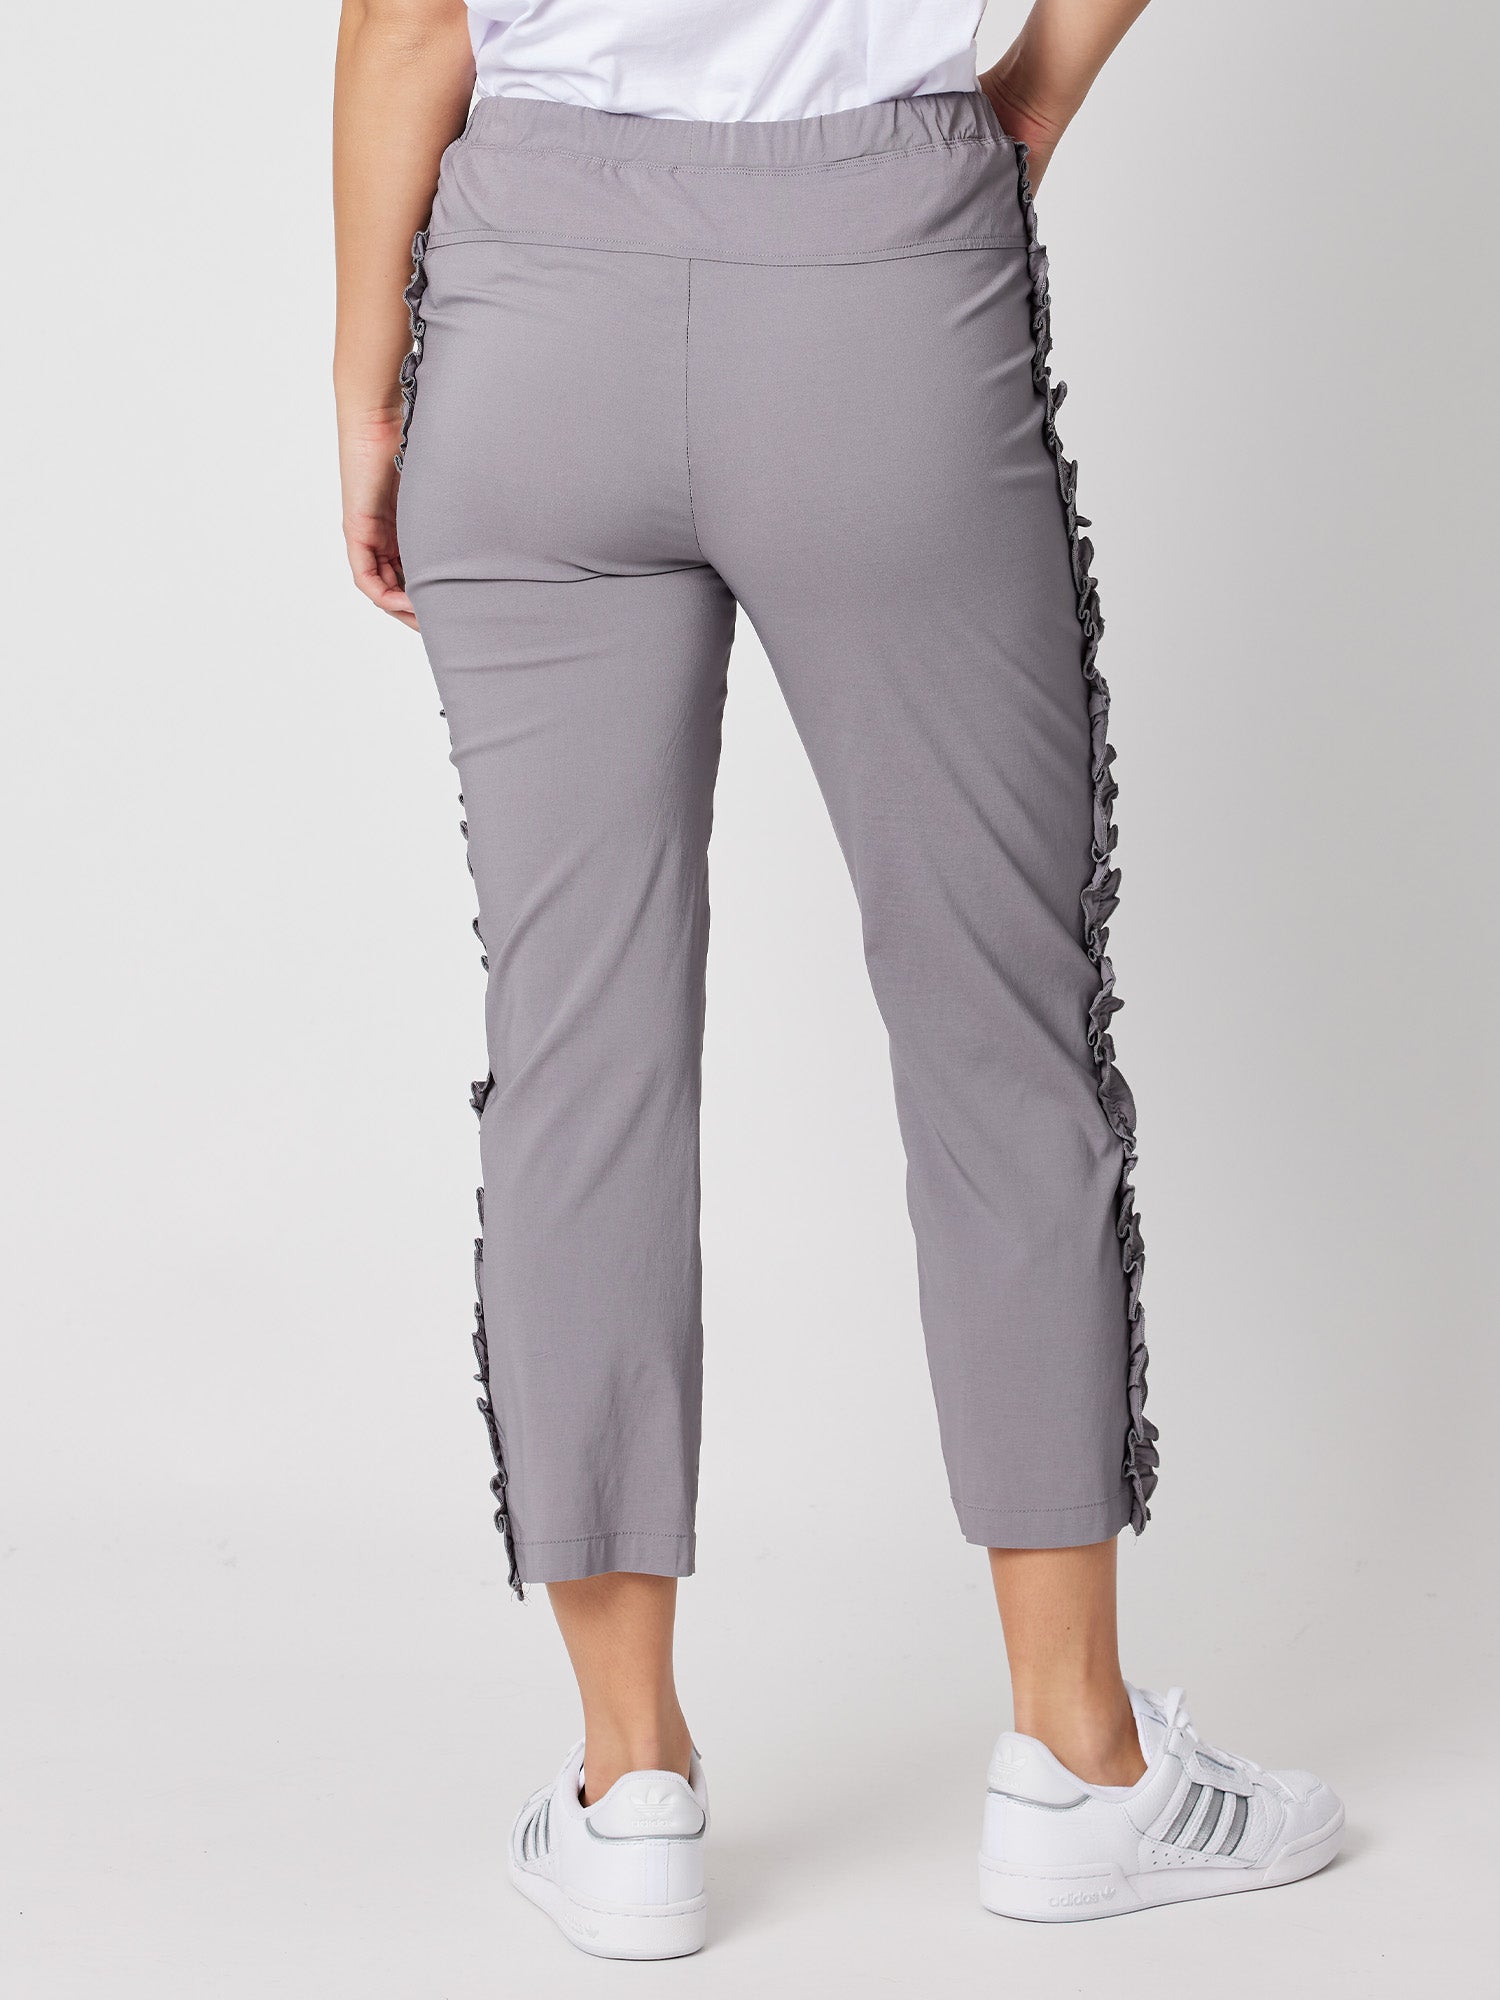 Frilled Side Detail Stretch Pant - Charcoal